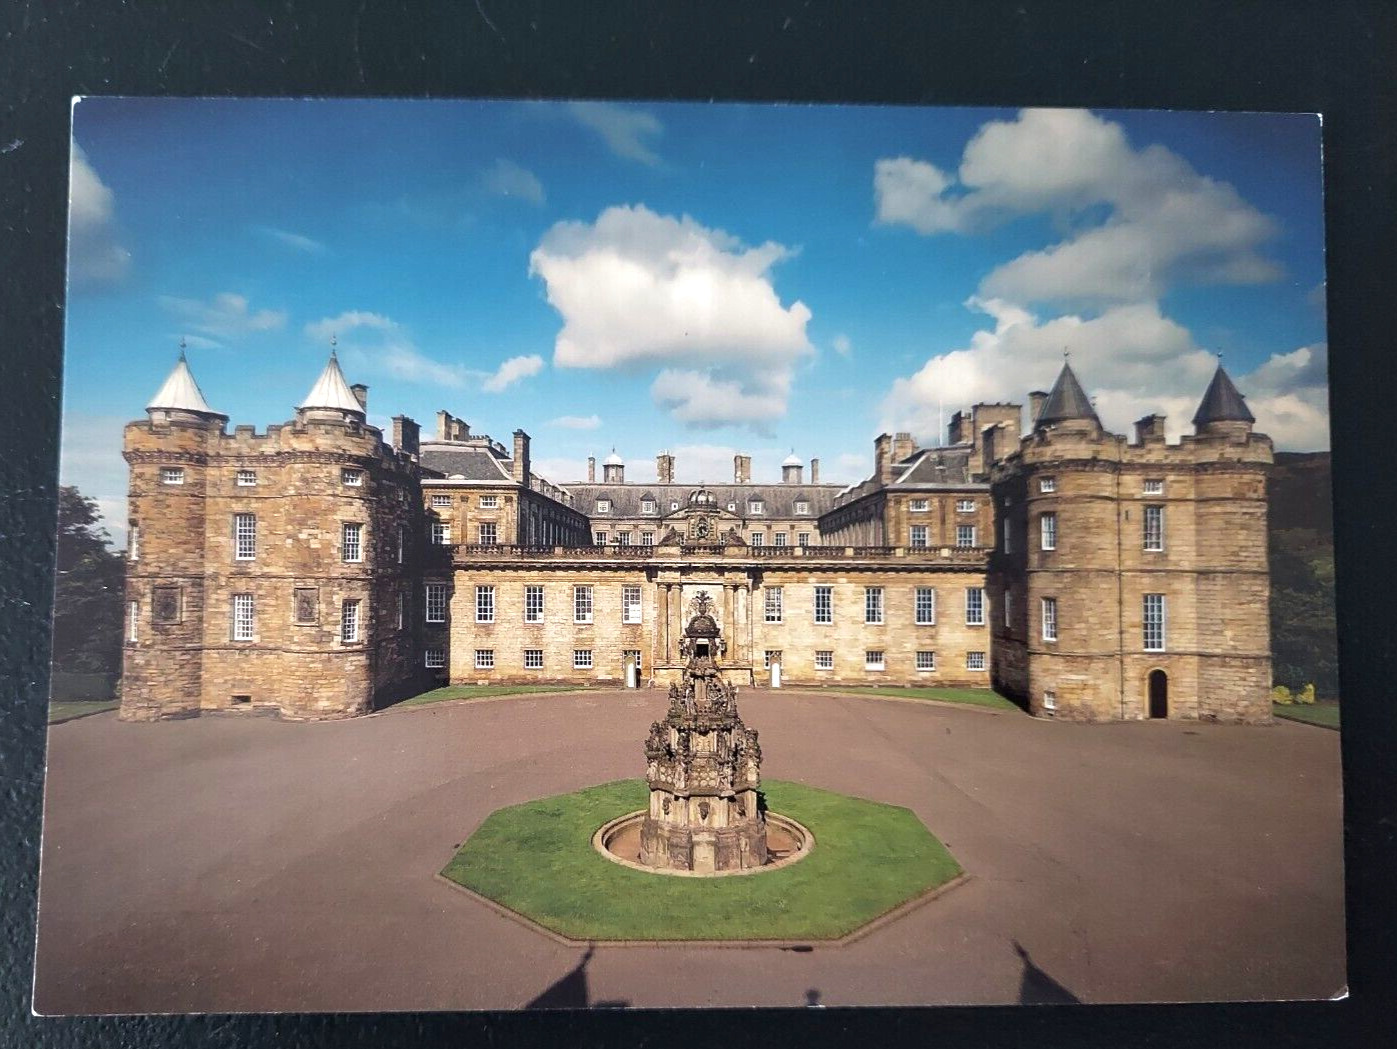 The Palace of HolyRoodHouse Postcard 1997 The West Front and Forecourt